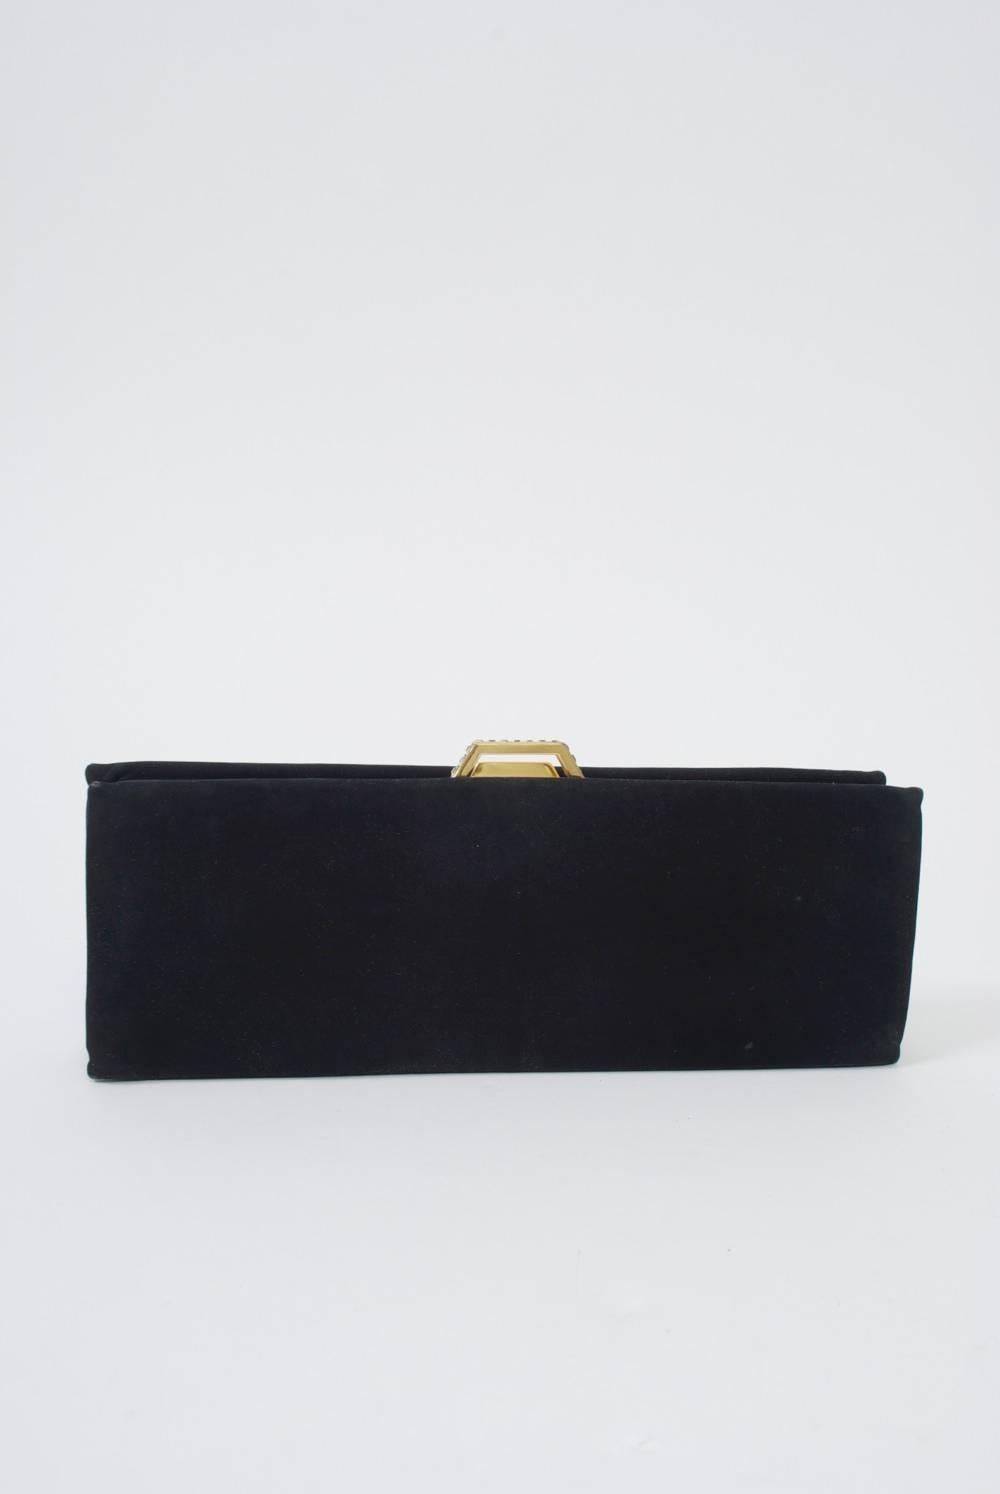 Sleek and elongated black clutch in black suede with rhinestone-studded goldtone clasp. Black taffeta interior with slip compartments, comb, mirror and change purse. A classic from one of America's foremost vintage handbag companies.